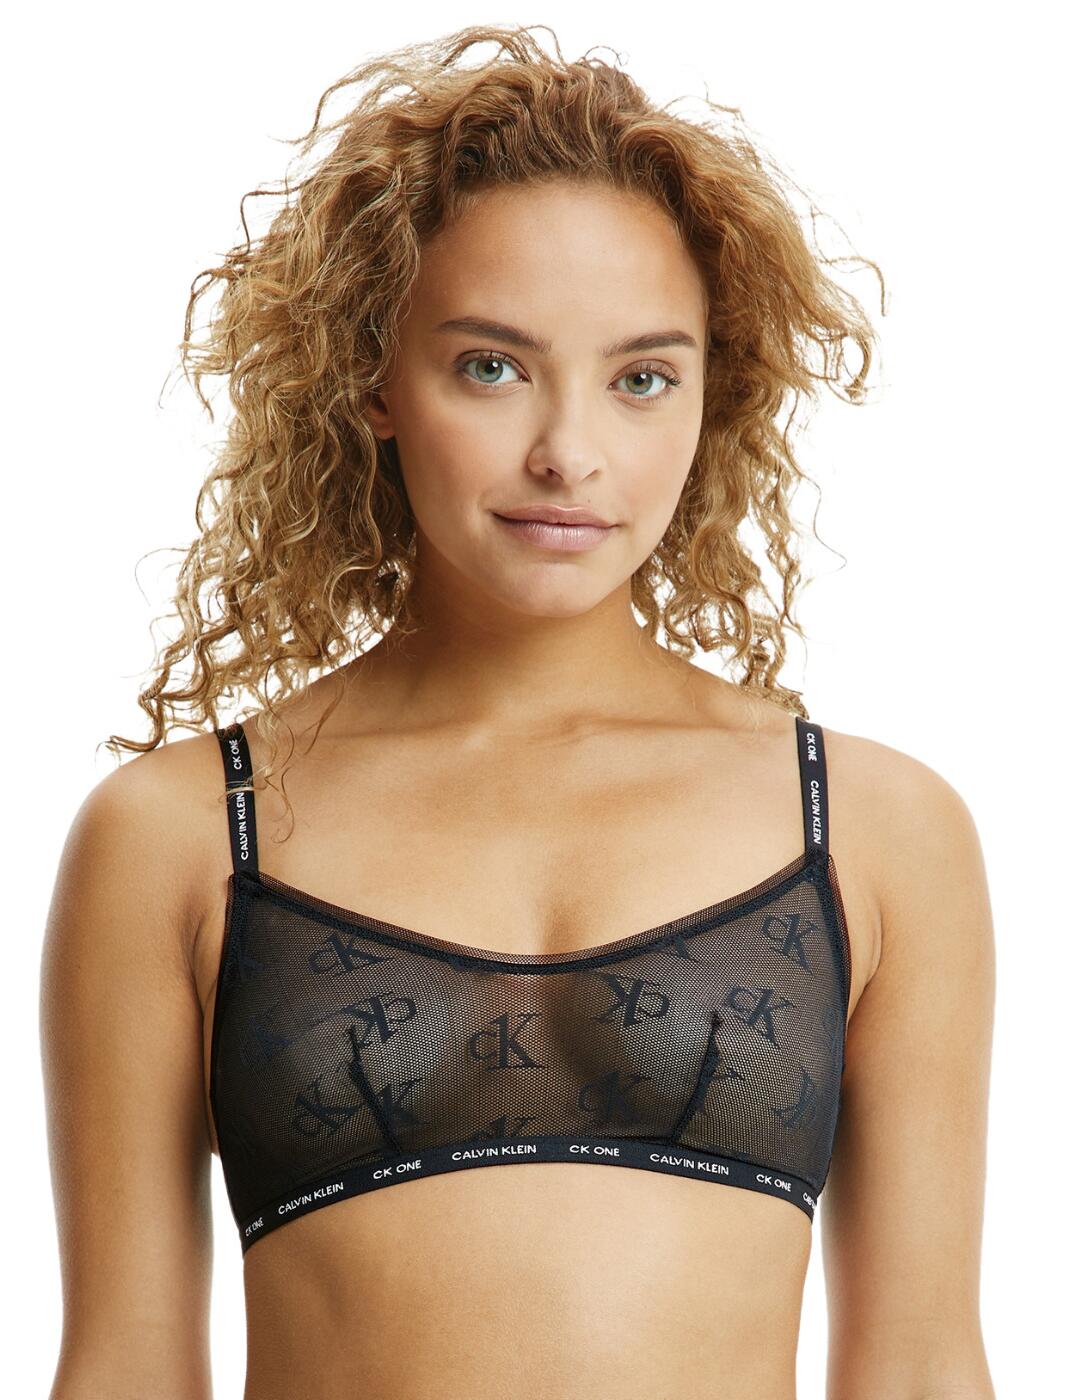 SHEER MESH Full-Coverage Unlined Underwire Bra at Belle Lacet